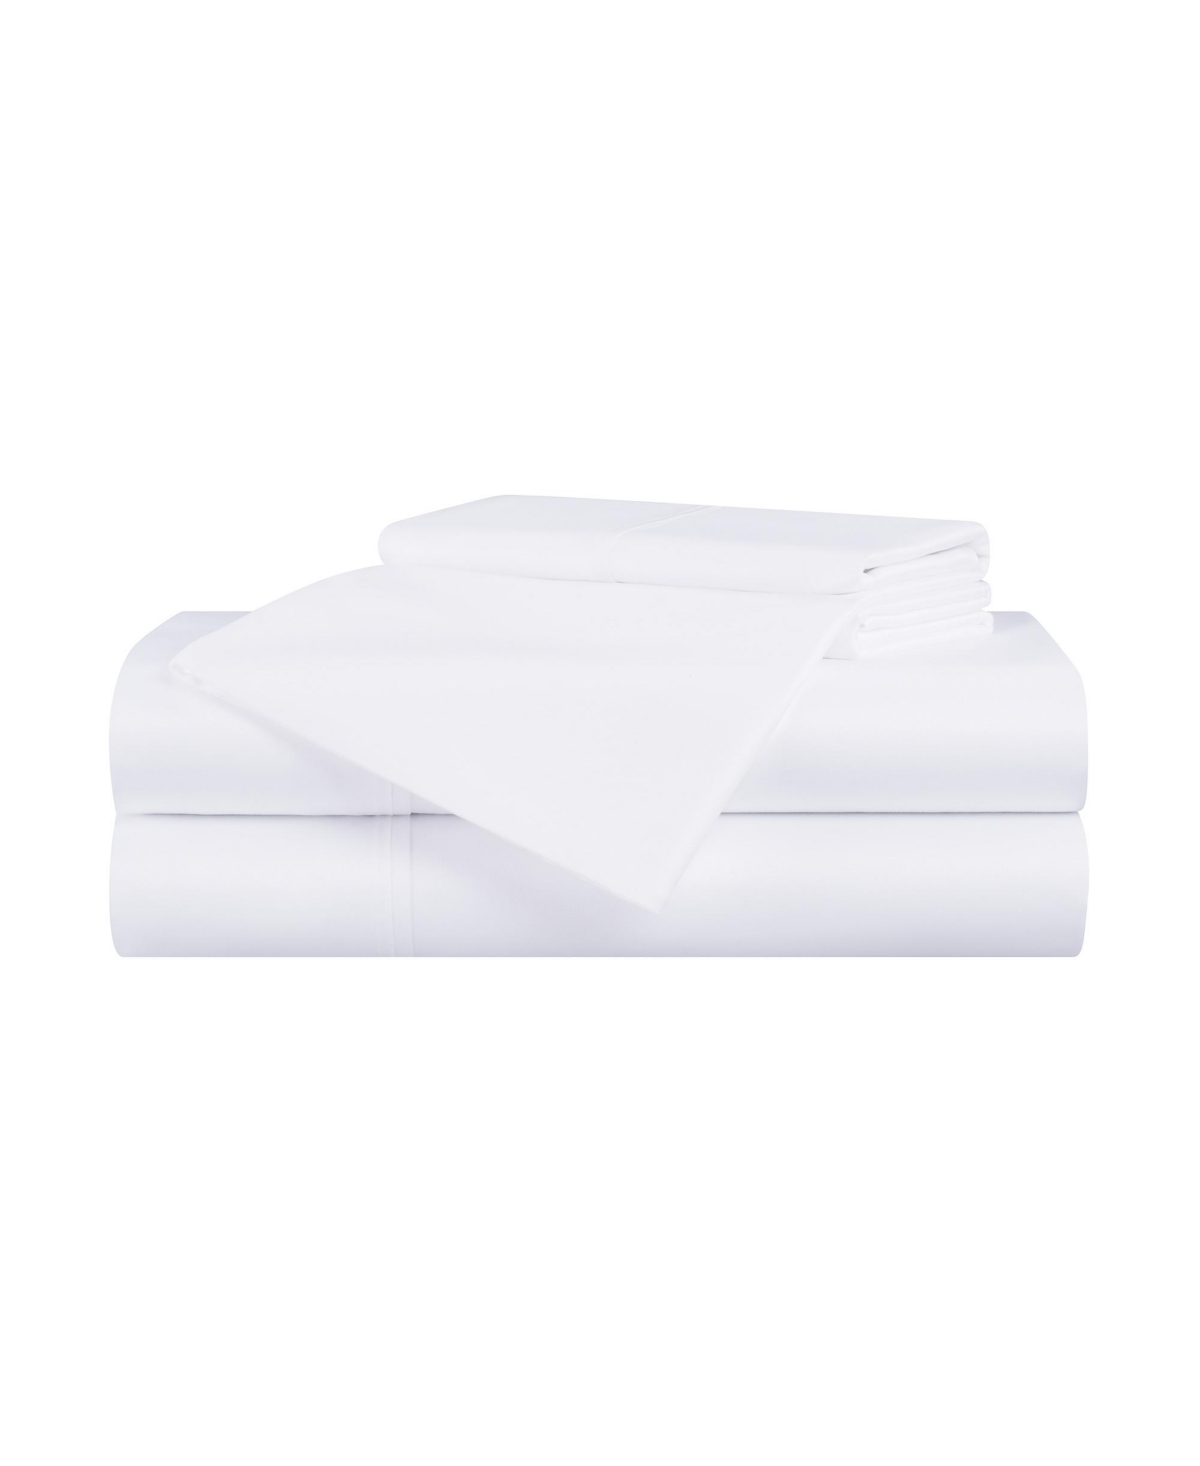 Aston And Arden Rayon From Bamboo King Sheet Set, Ultra Silky Luxury Sheets, 1 Flat Sheet, 1 Fitted Sheet, 2 Pillowc In White